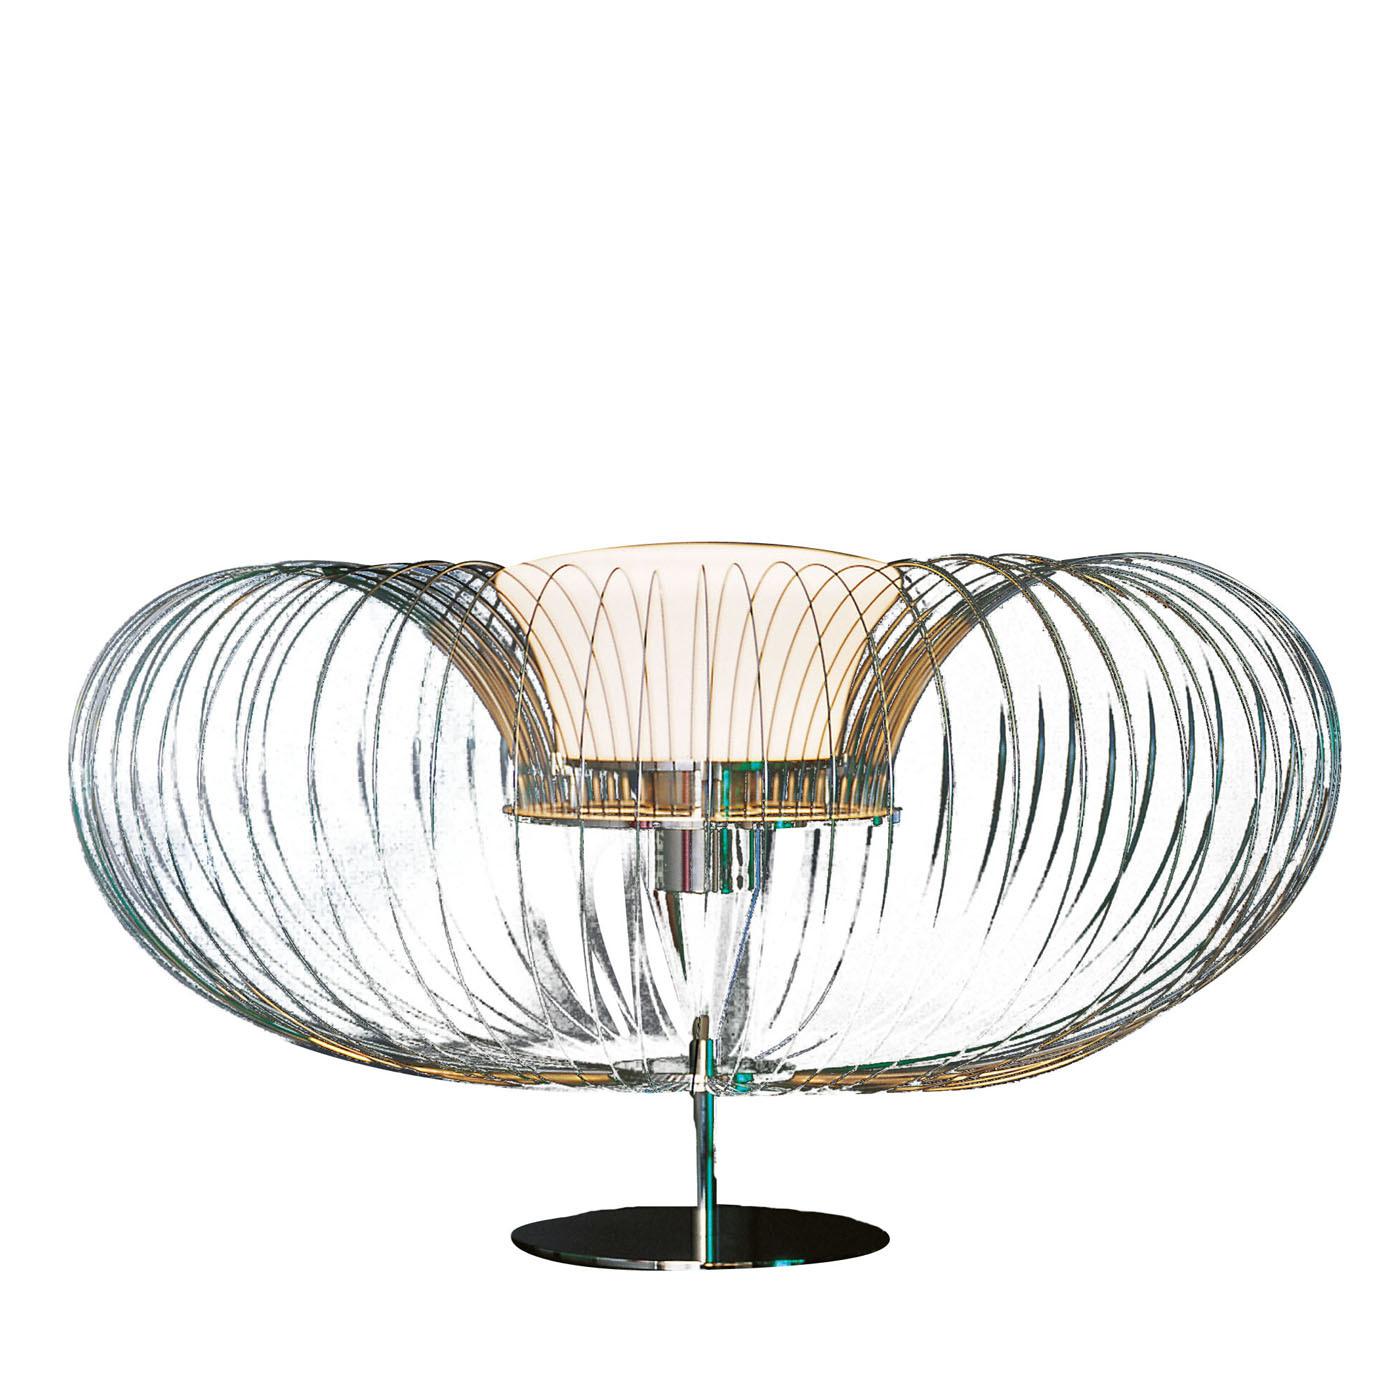 The unique steel flower T table lamp is the perfect accessory to add a touch of sophistication in your home or office. The structure and base are crafted in chromium-plated brass, while the top features harmonic steel wires and the Illuminating unit